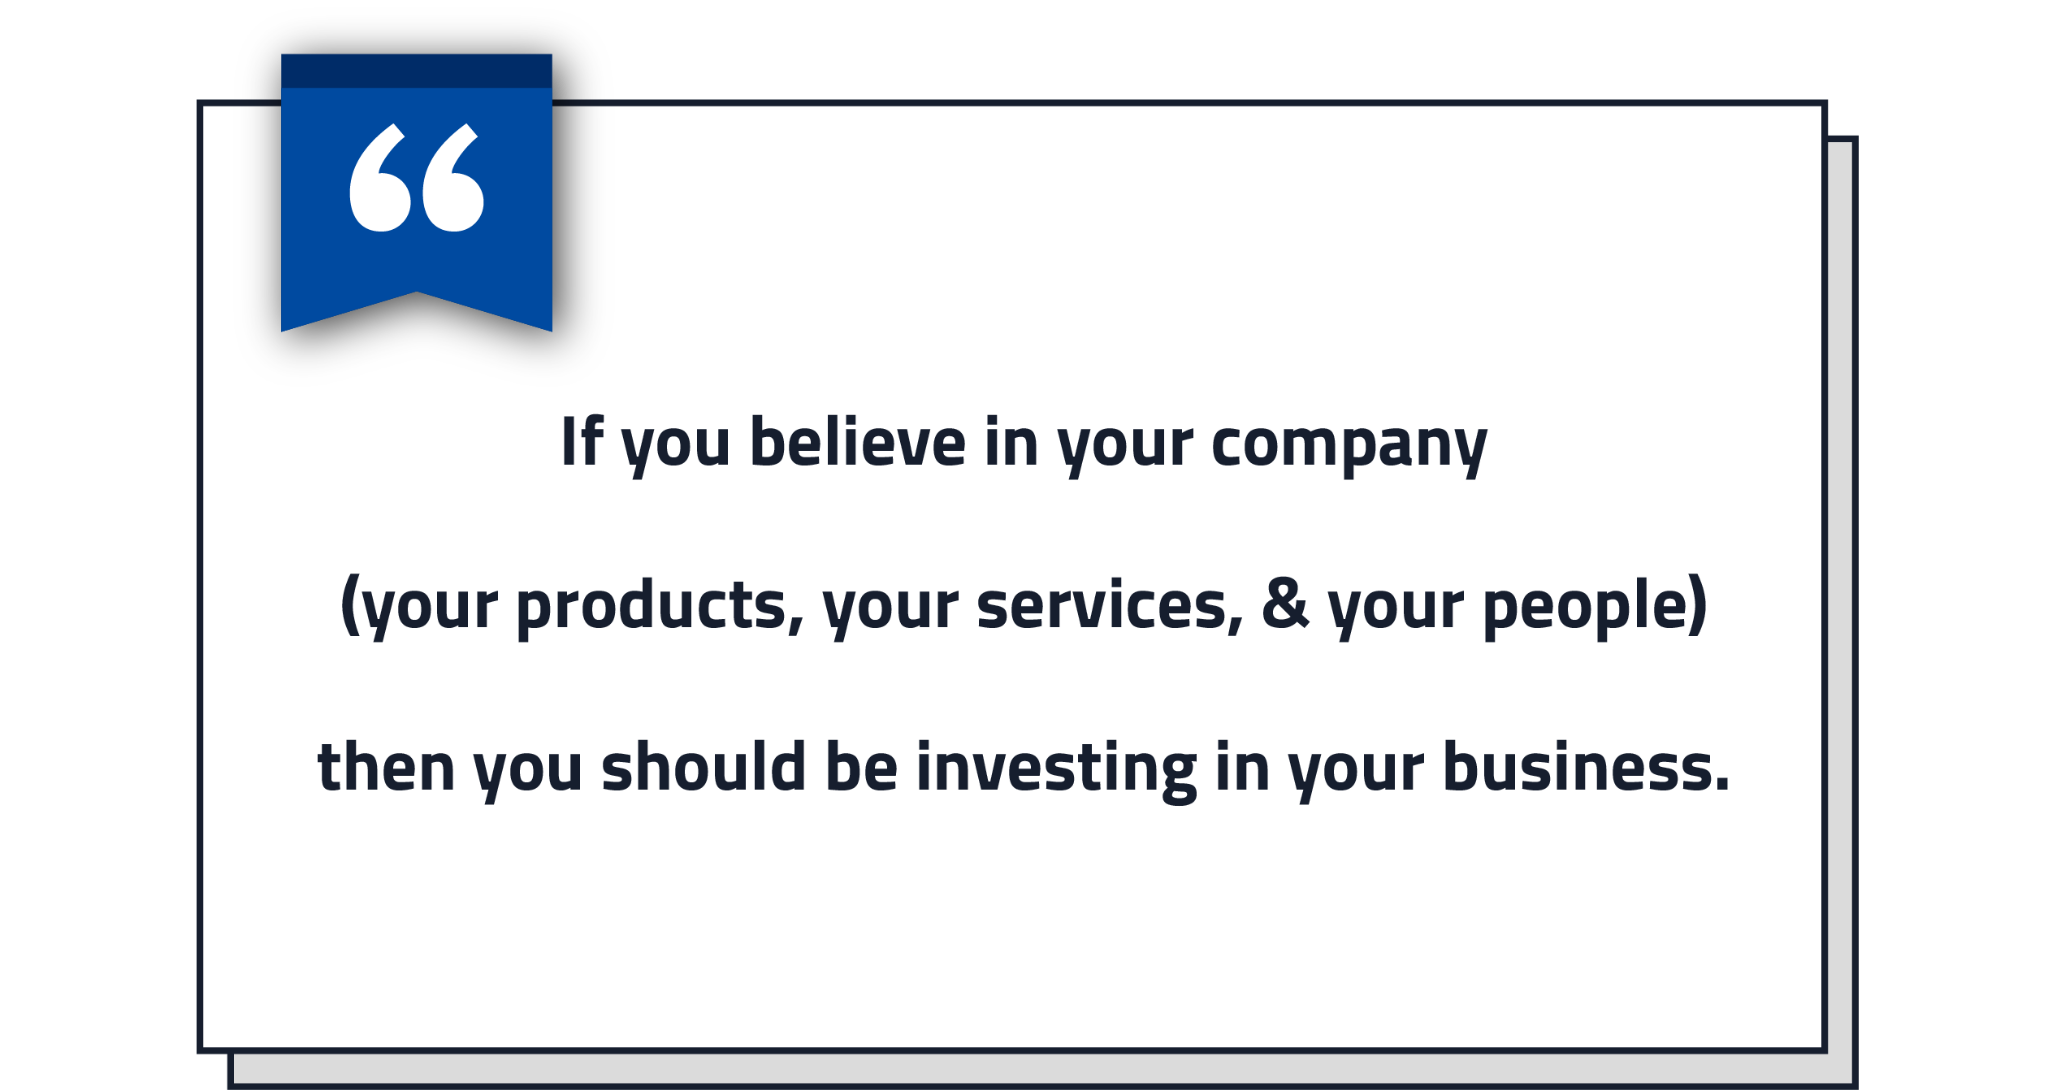 miles-technologies-quote-if-you-believe-in-your-company-you-should-invest-in-your-business